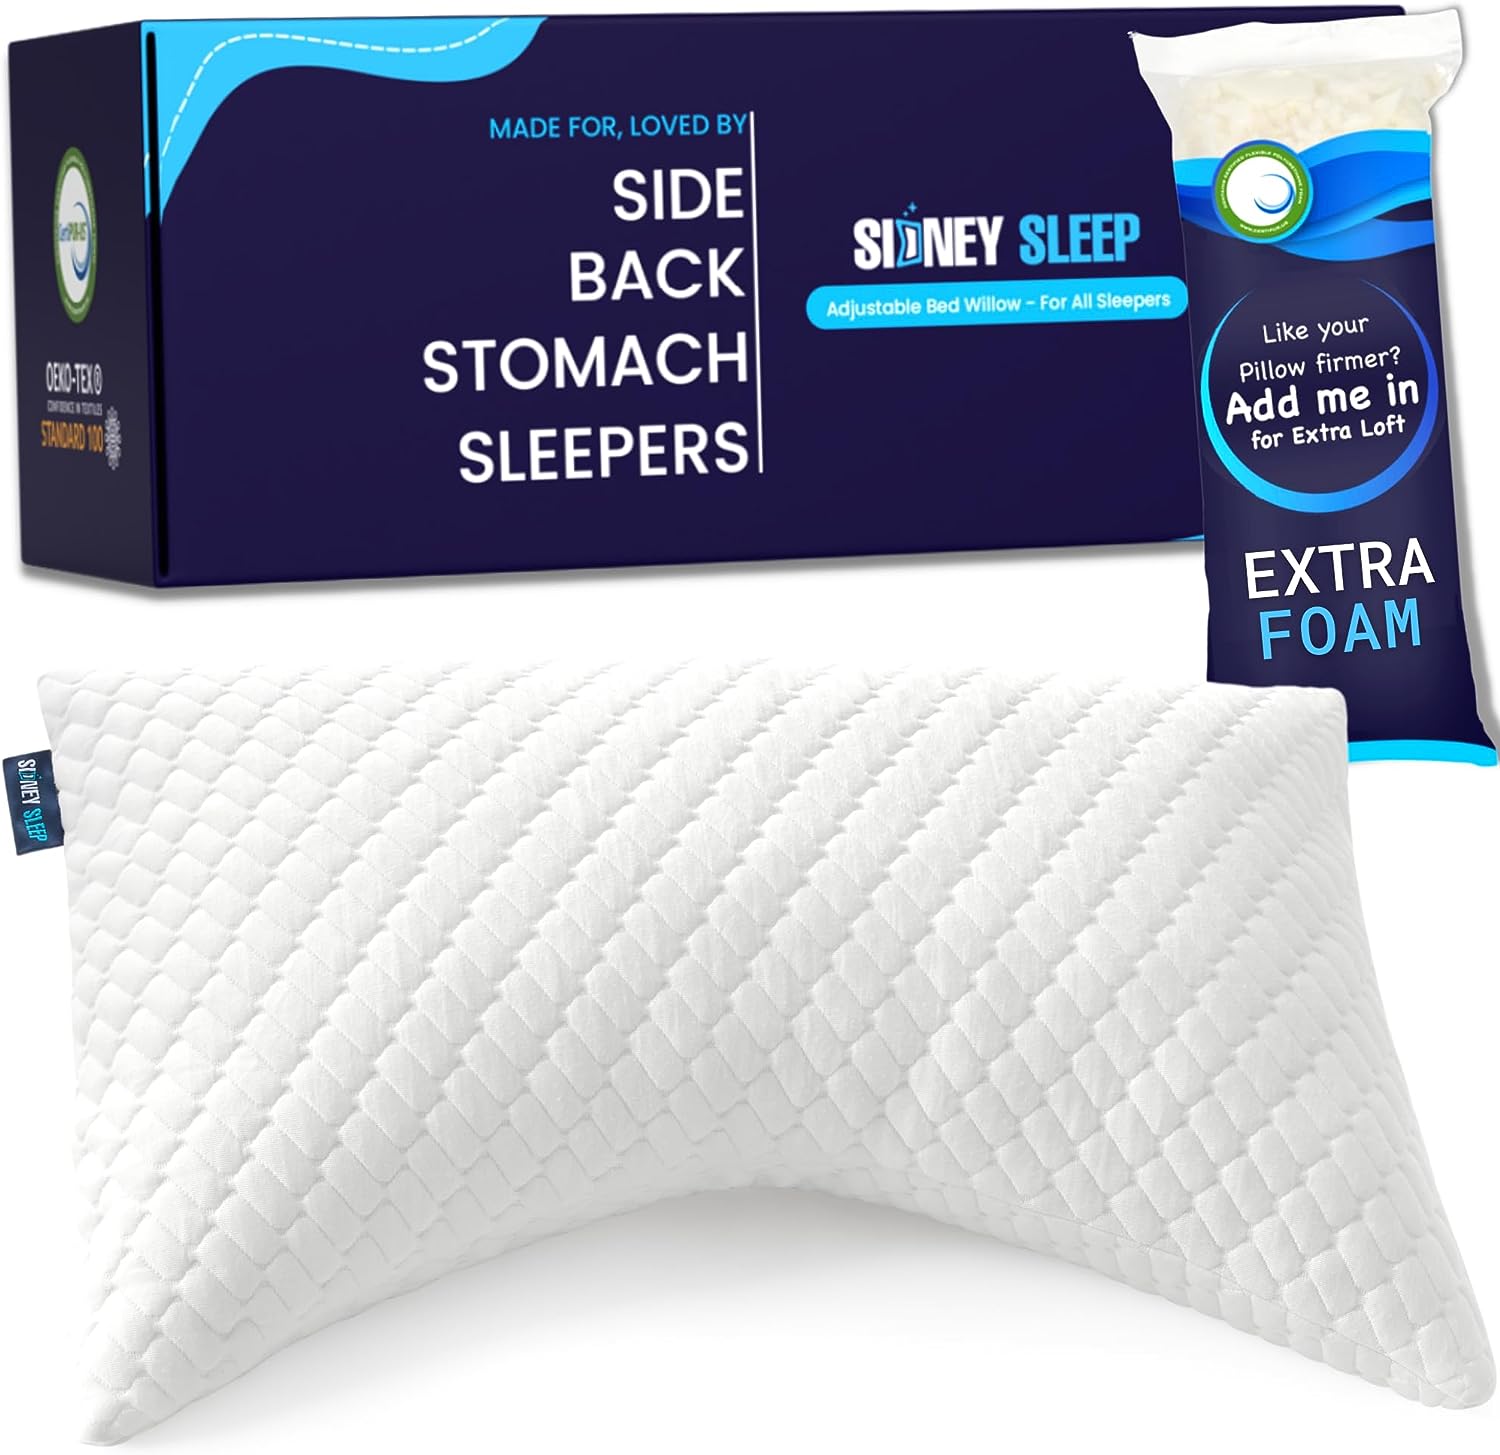 https://bigbigmart.com/wp-content/uploads/2023/08/Sidney-Sleep-Bed-Pillow-for-Side-and-Back-Sleepers-Adjustable-Filling-Memory-Foam-Pillow-for-Neck-and-Shoulder-Pain-Customizable-Loft-Queen-Size-Additional-Foam-Bag-Included-Queen-White.jpg